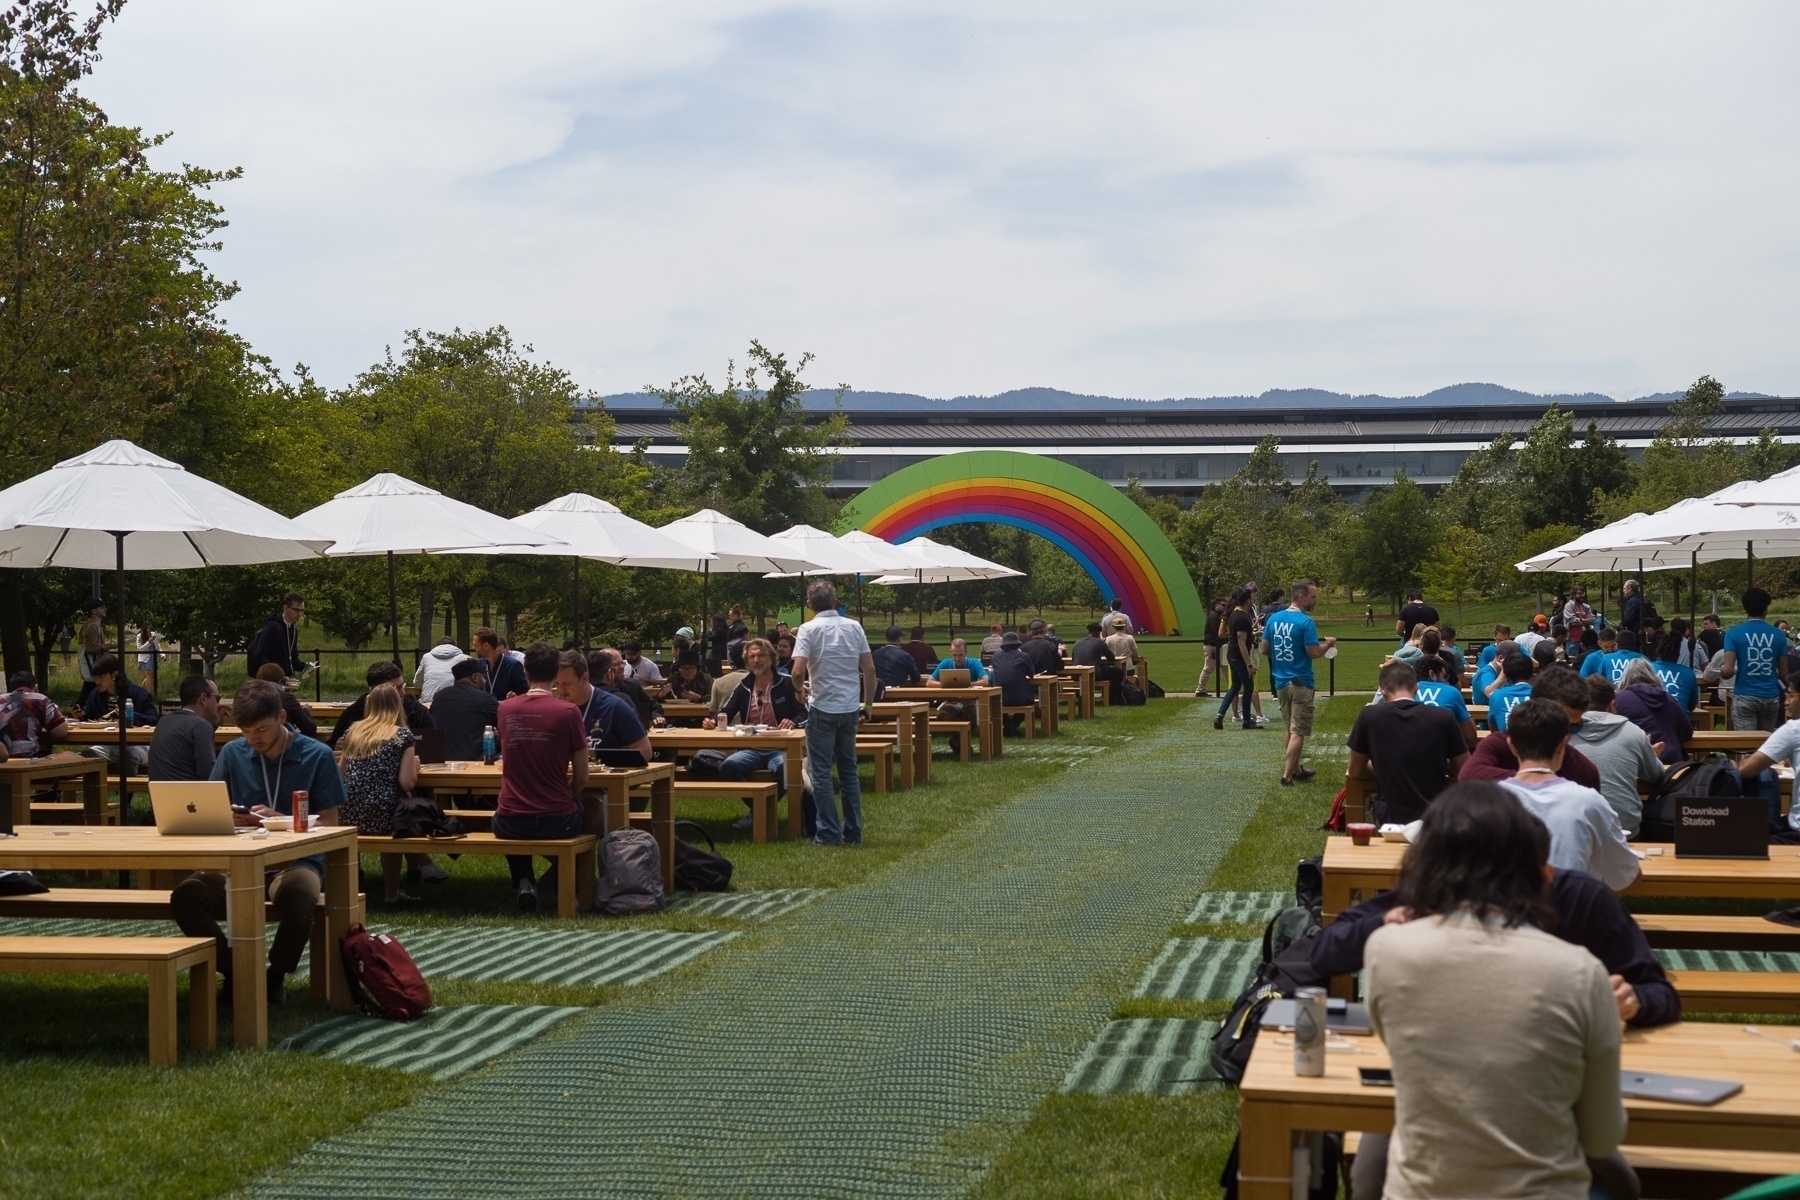 A number of tables are set up in rows in a meadow with people seated at them. Rainbow arches are visible in the distance. A cloudy hazy sky above.